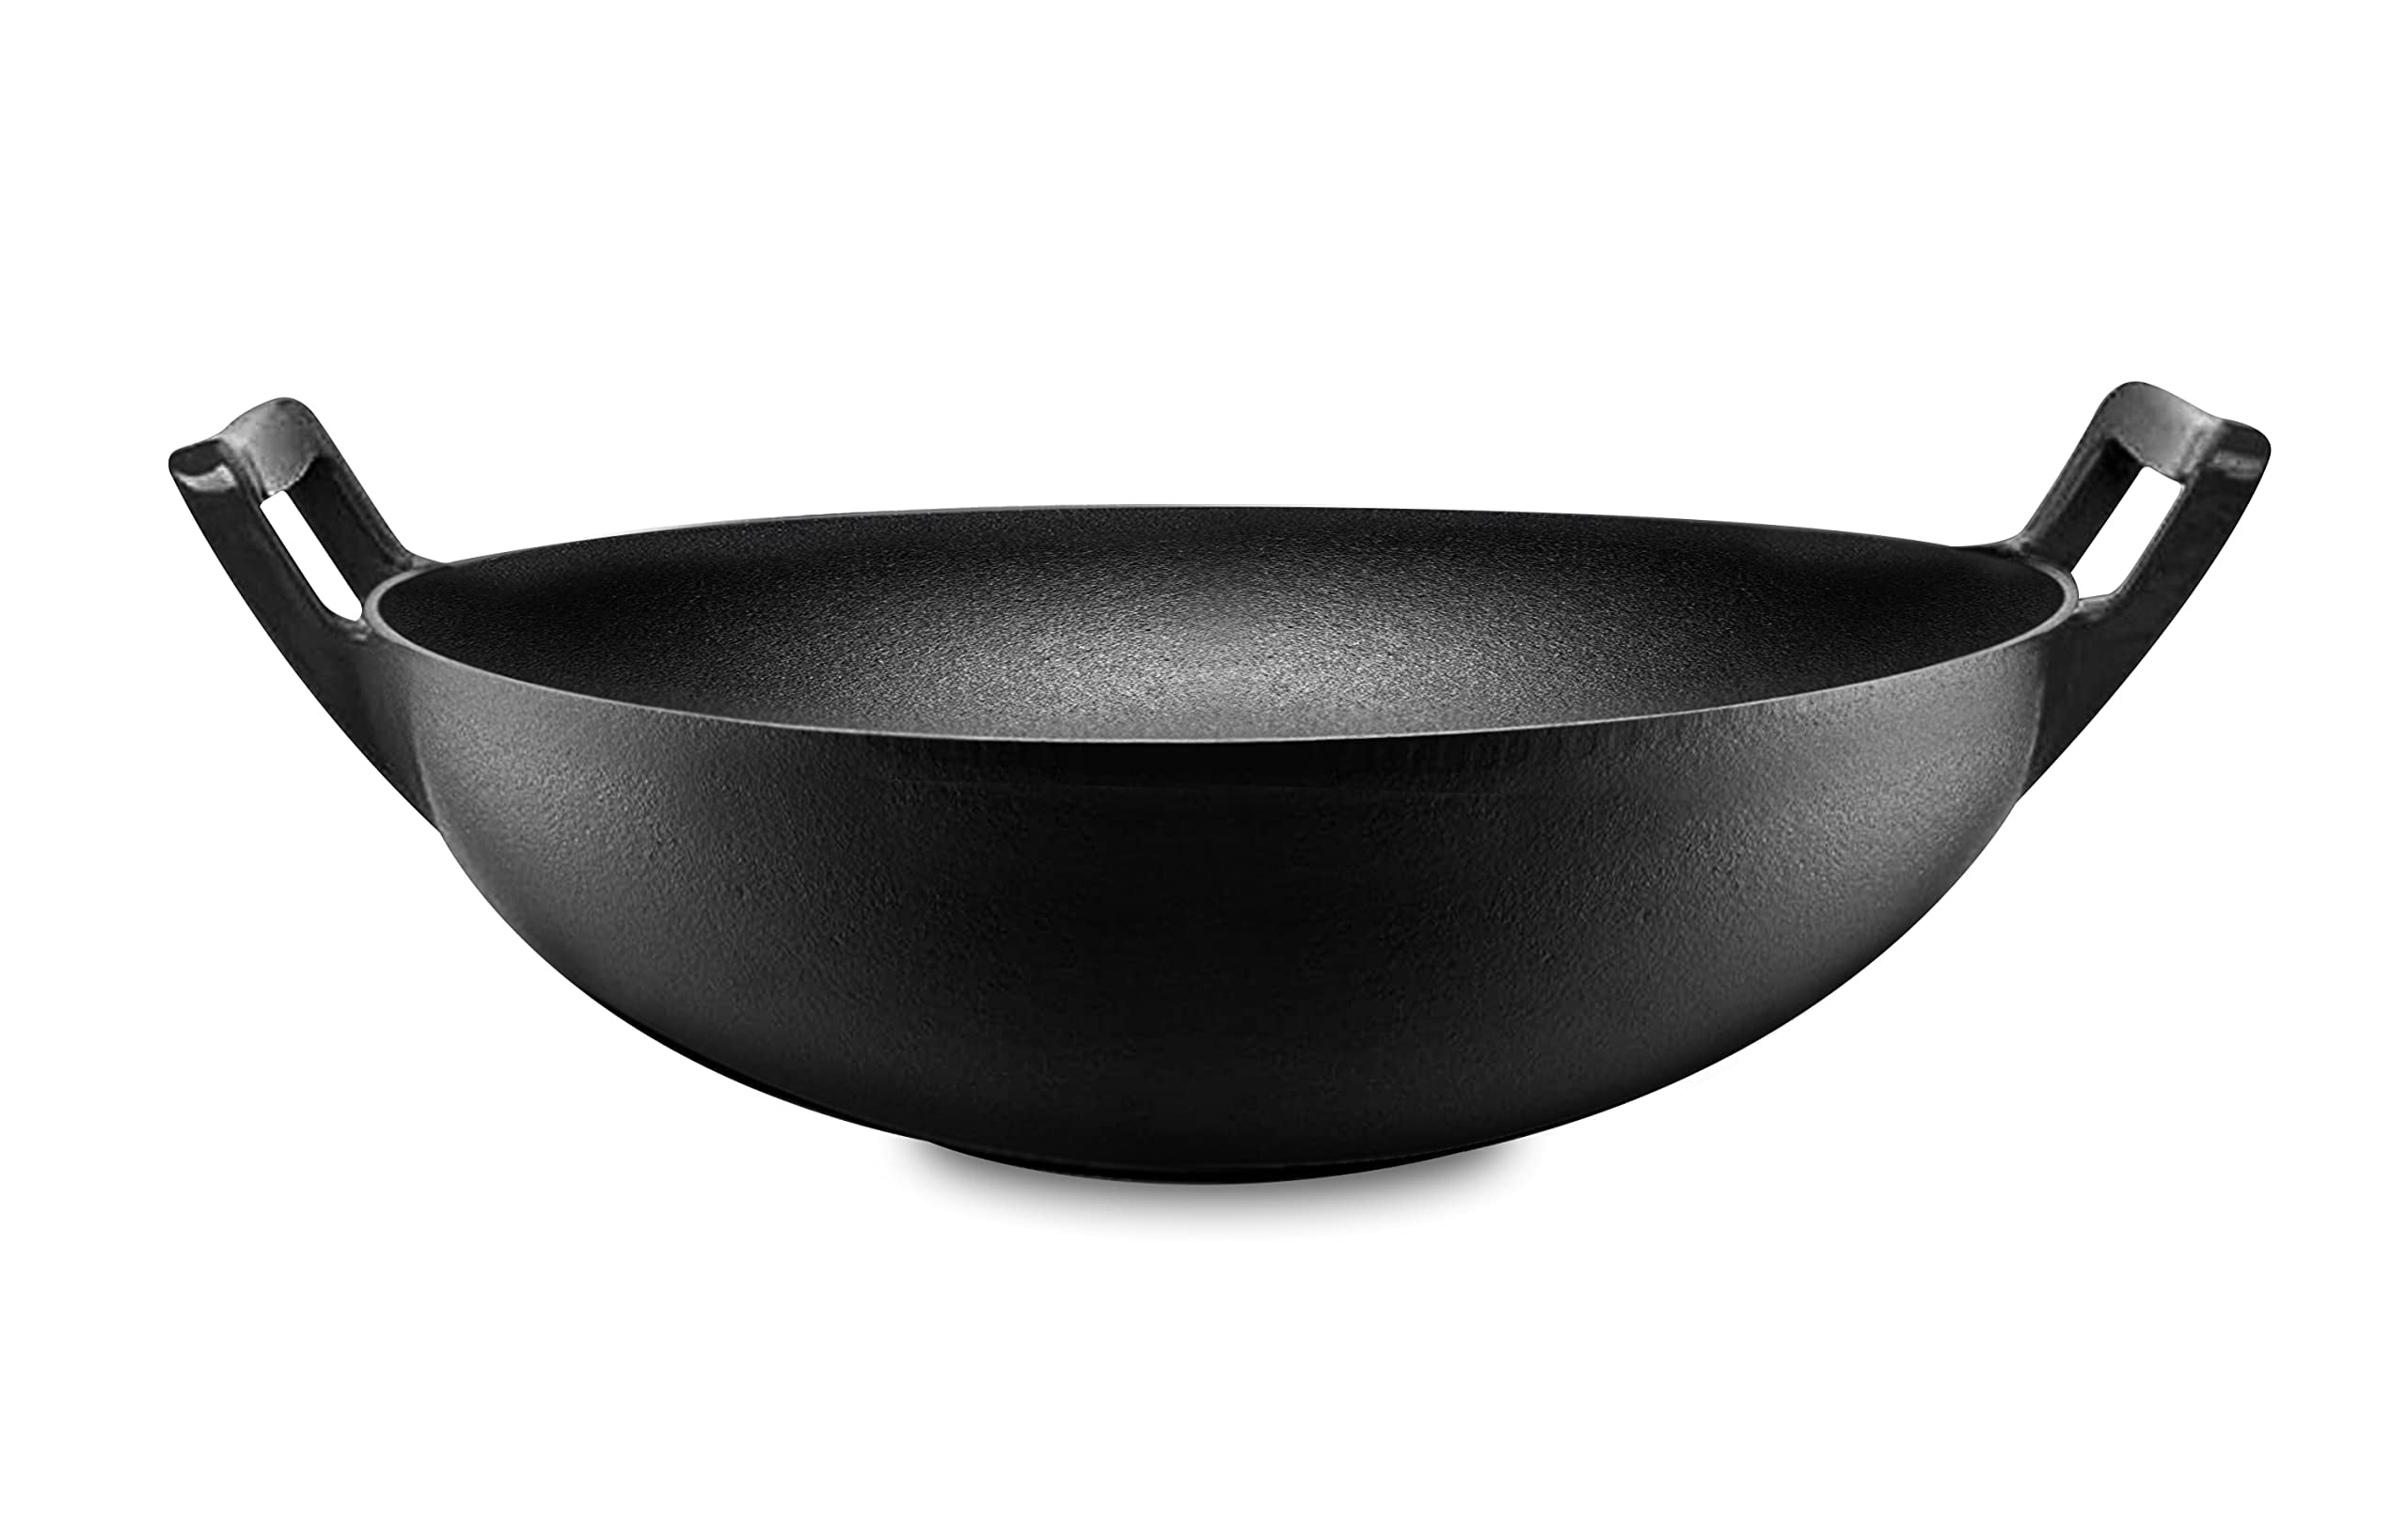 Backcountry Iron 14 inch Cast Iron Wok with Flat Base and Handles